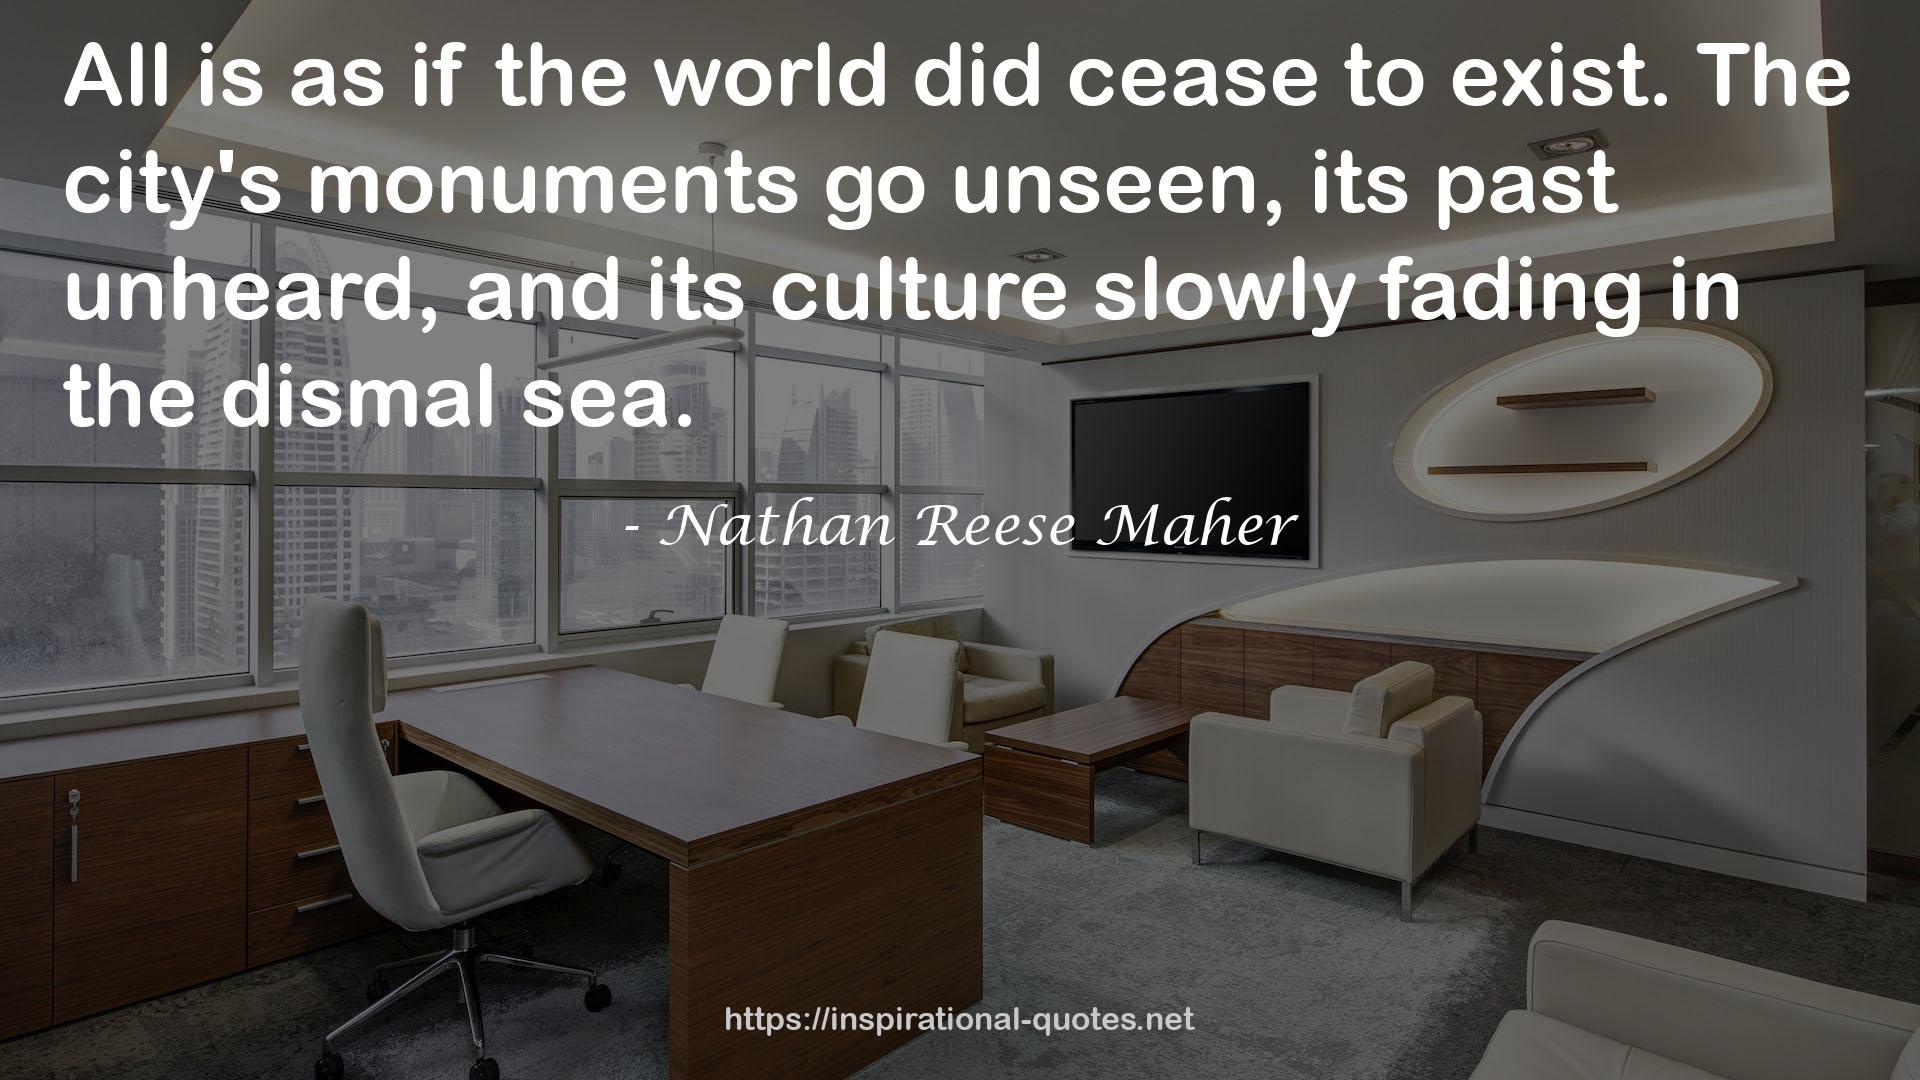 Nathan Reese Maher QUOTES